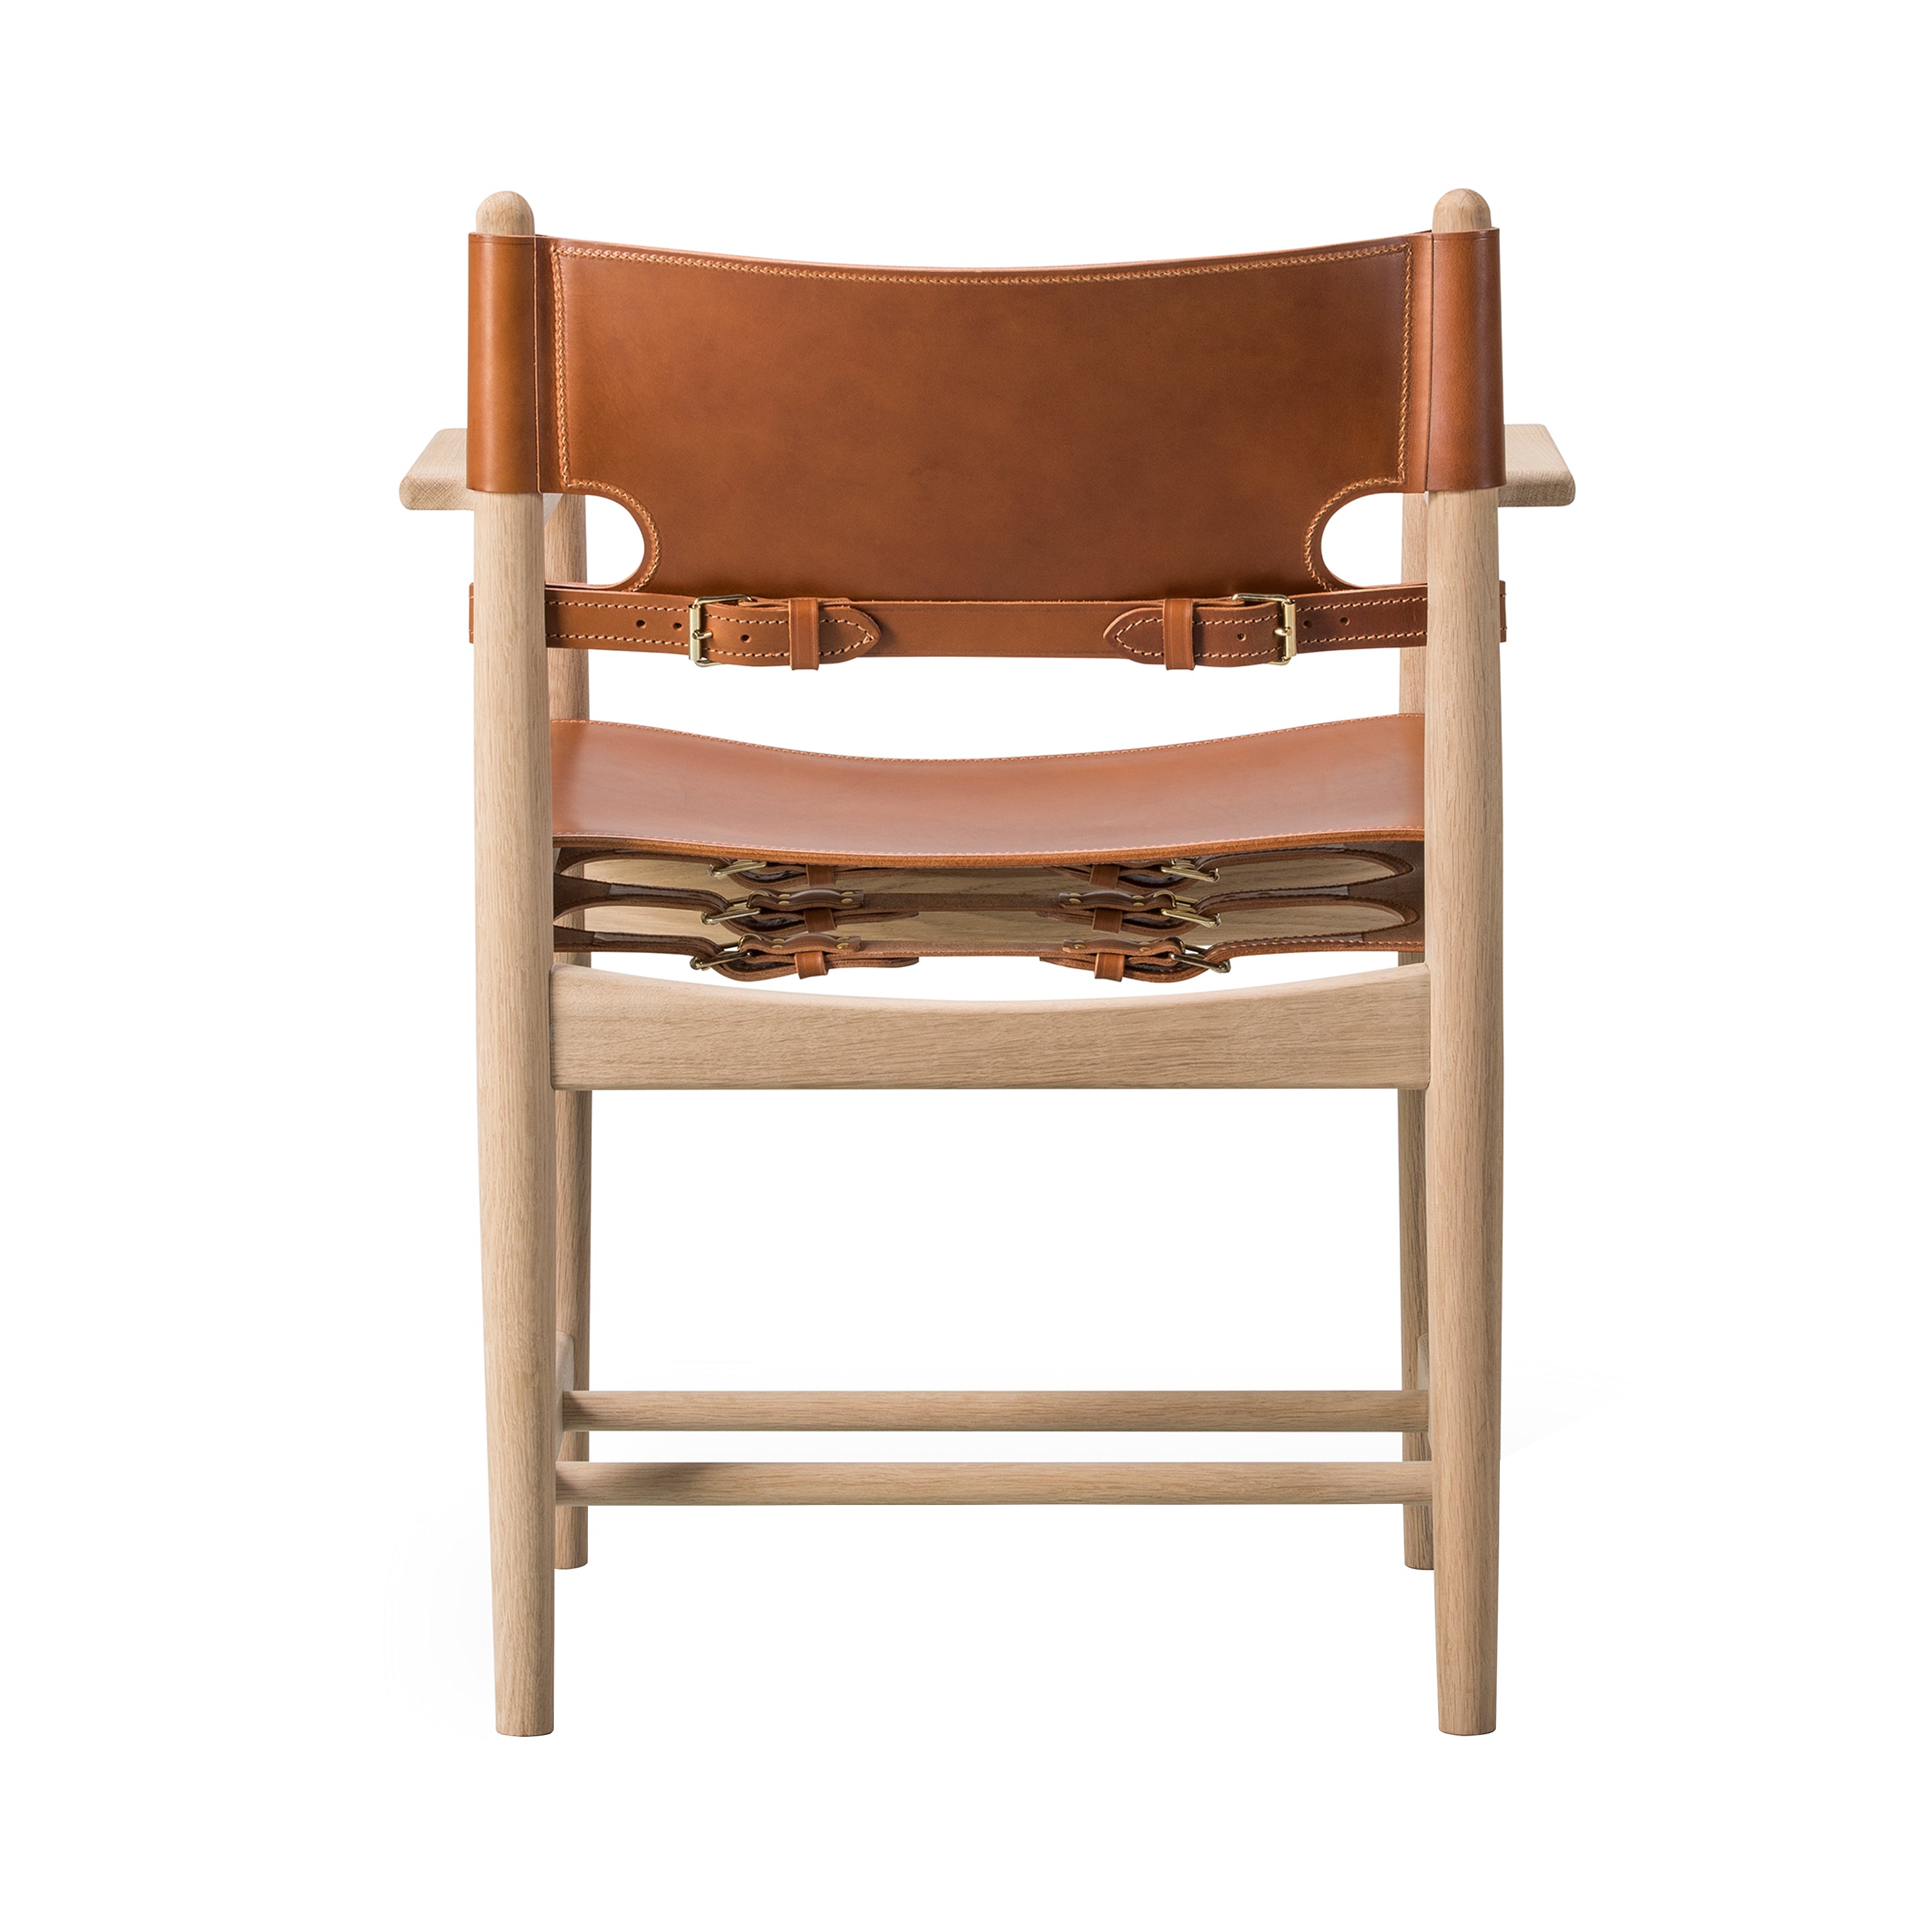 The Spanish Dining Chair: With Arm + Soaped Oak + Cognac